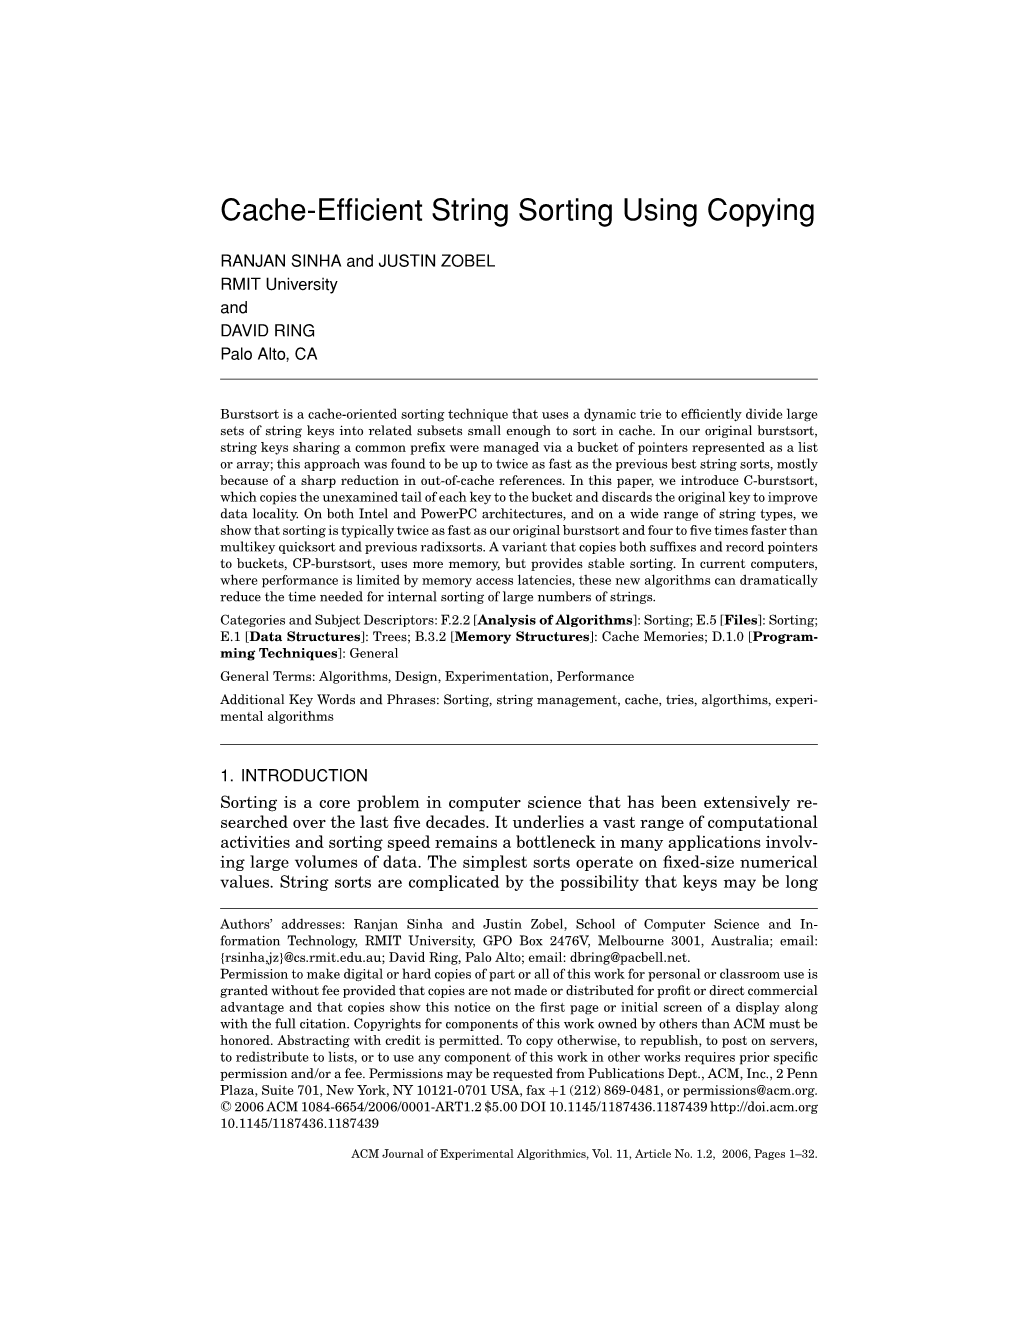 Cache-Efficient String Sorting Using Copying